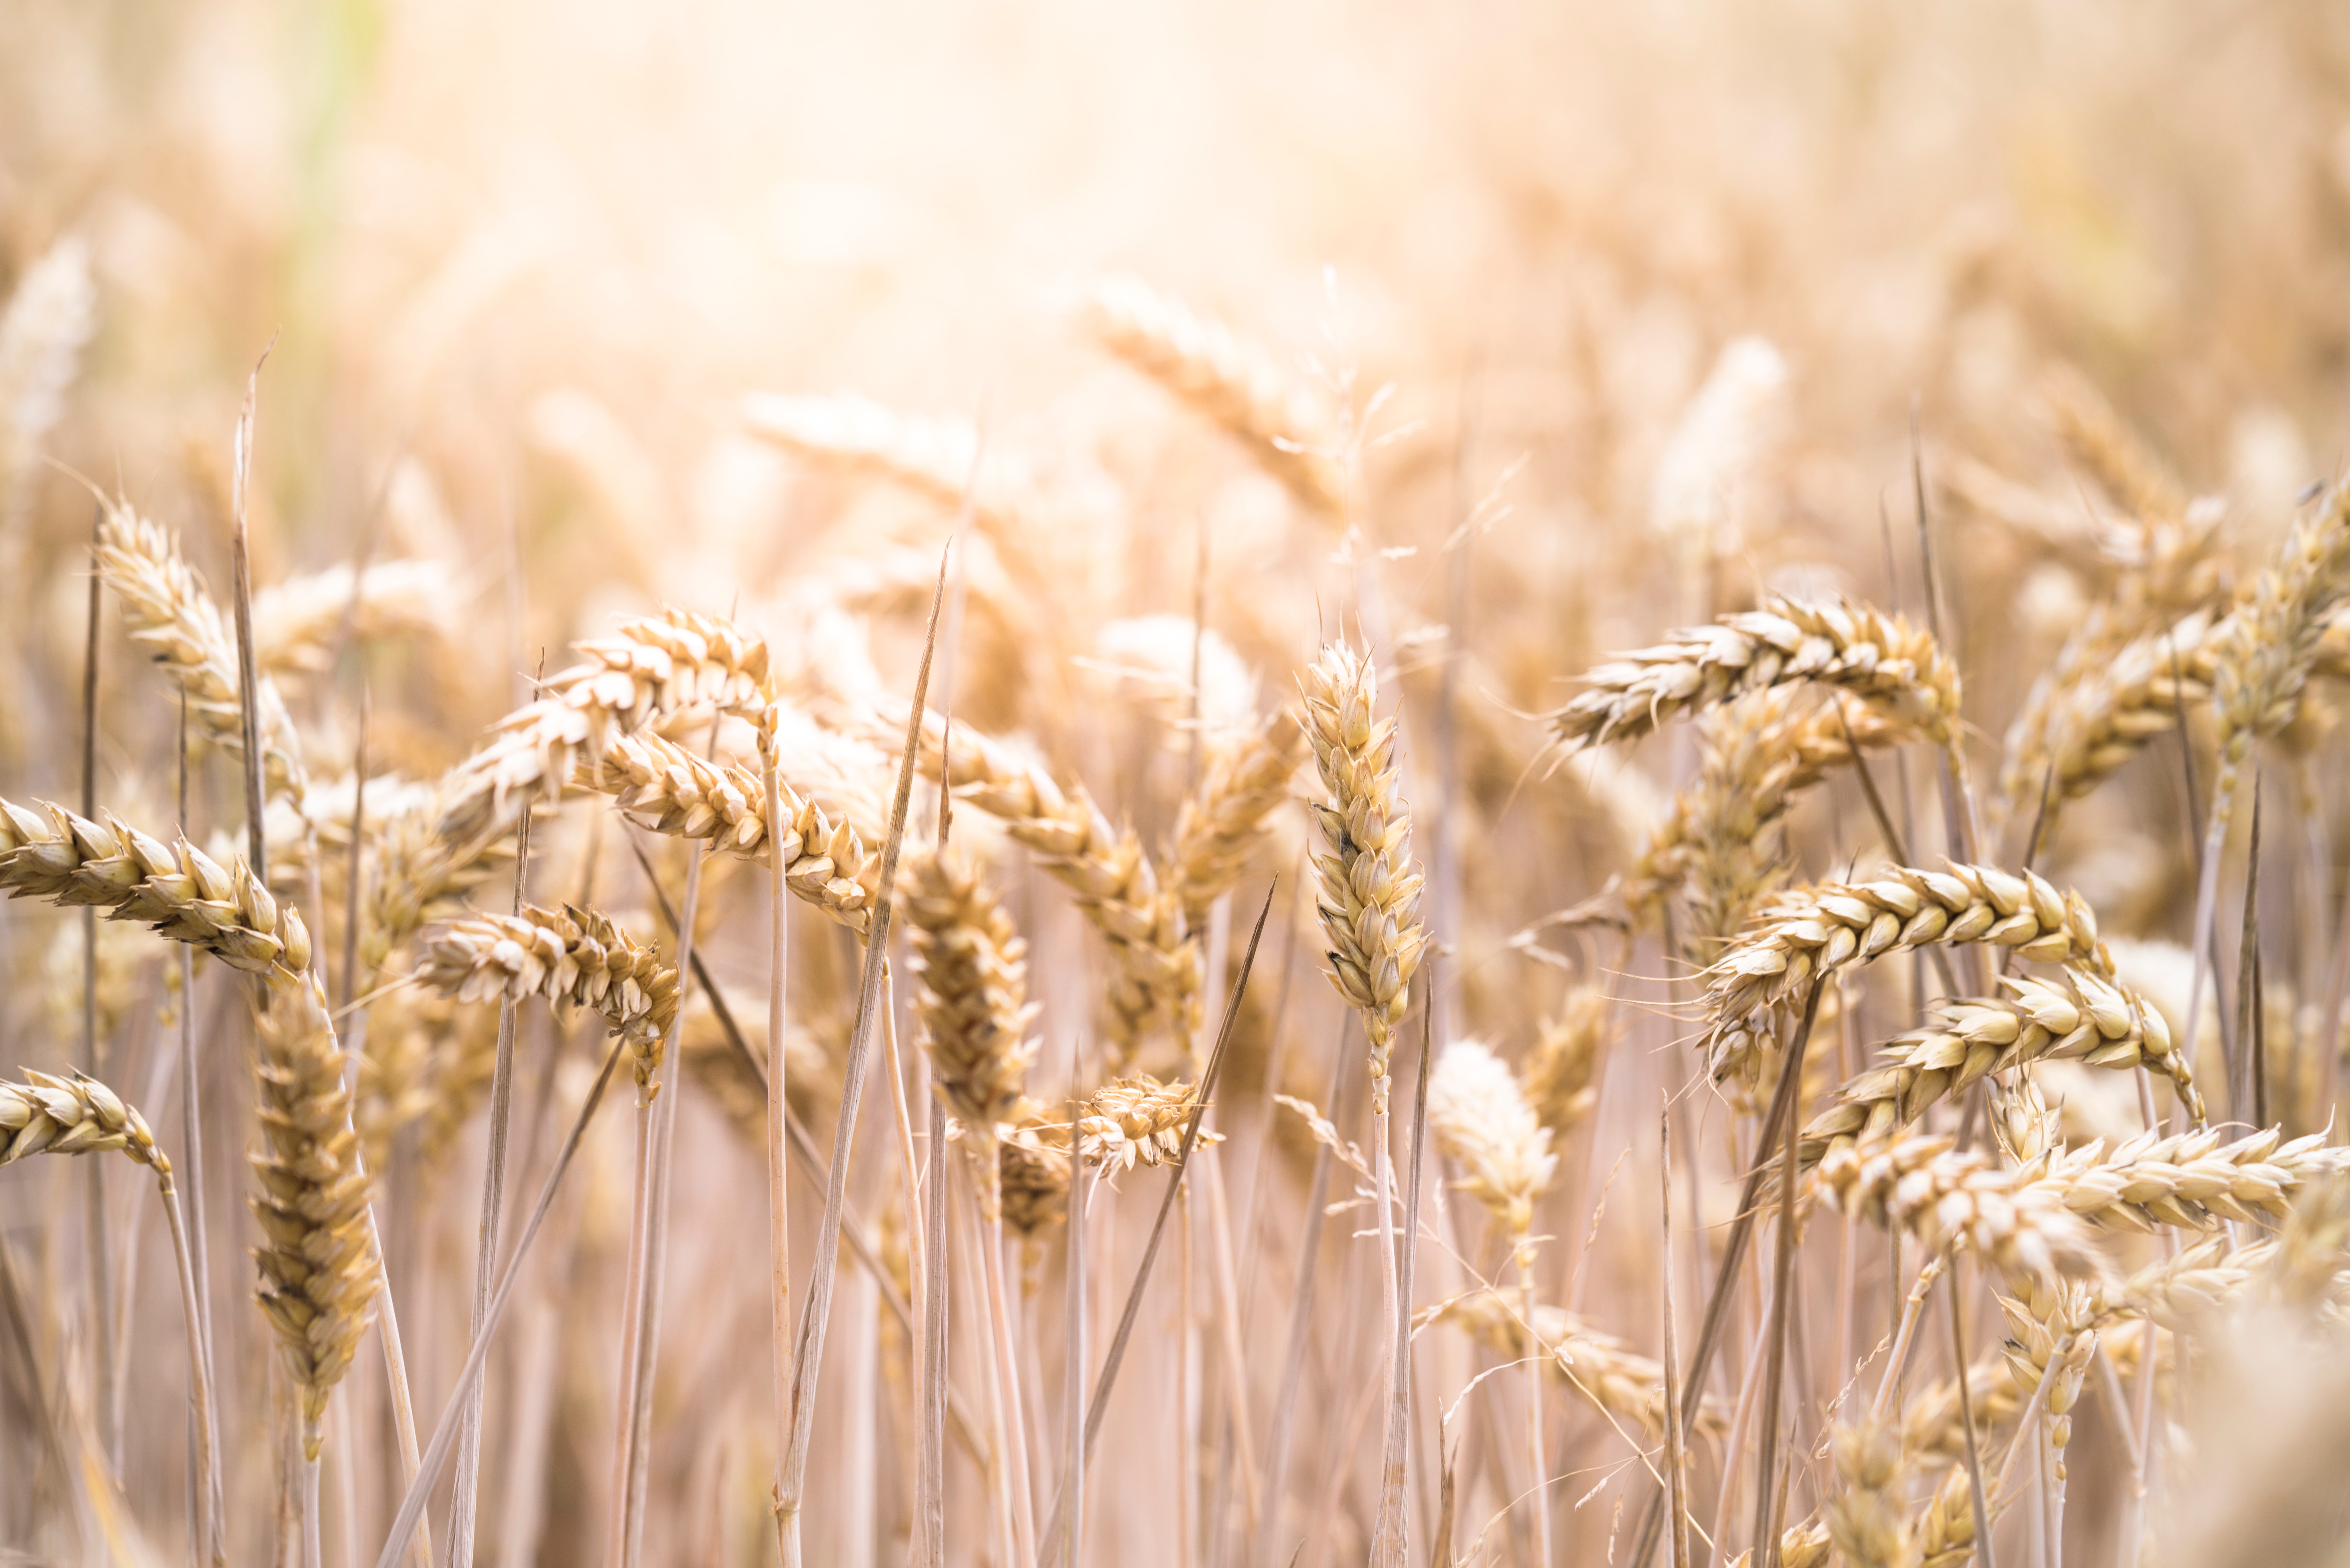 Wonderinterest | The price of wheat is still high. How much longer will it last?